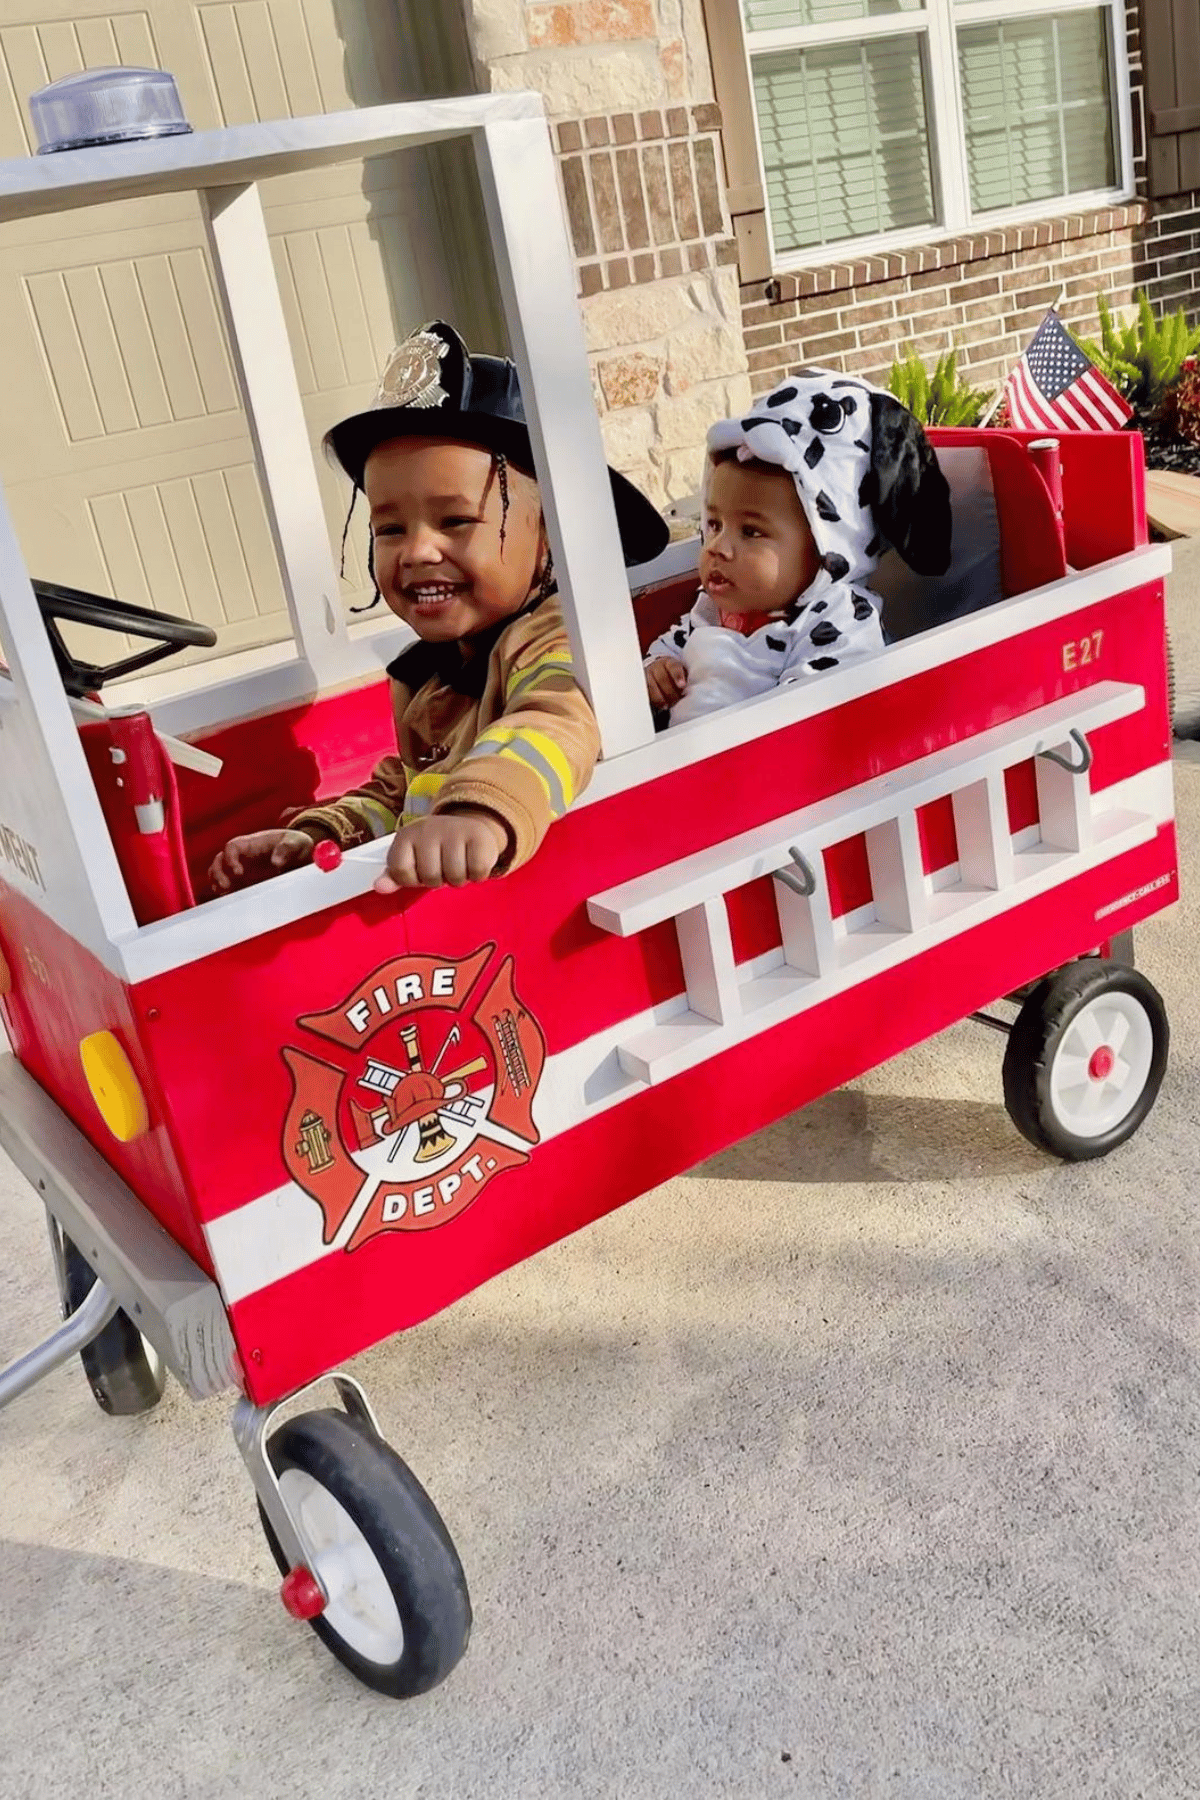 Baby as a dalmation and older brother as a fire fighter- both in a fire truck wagon